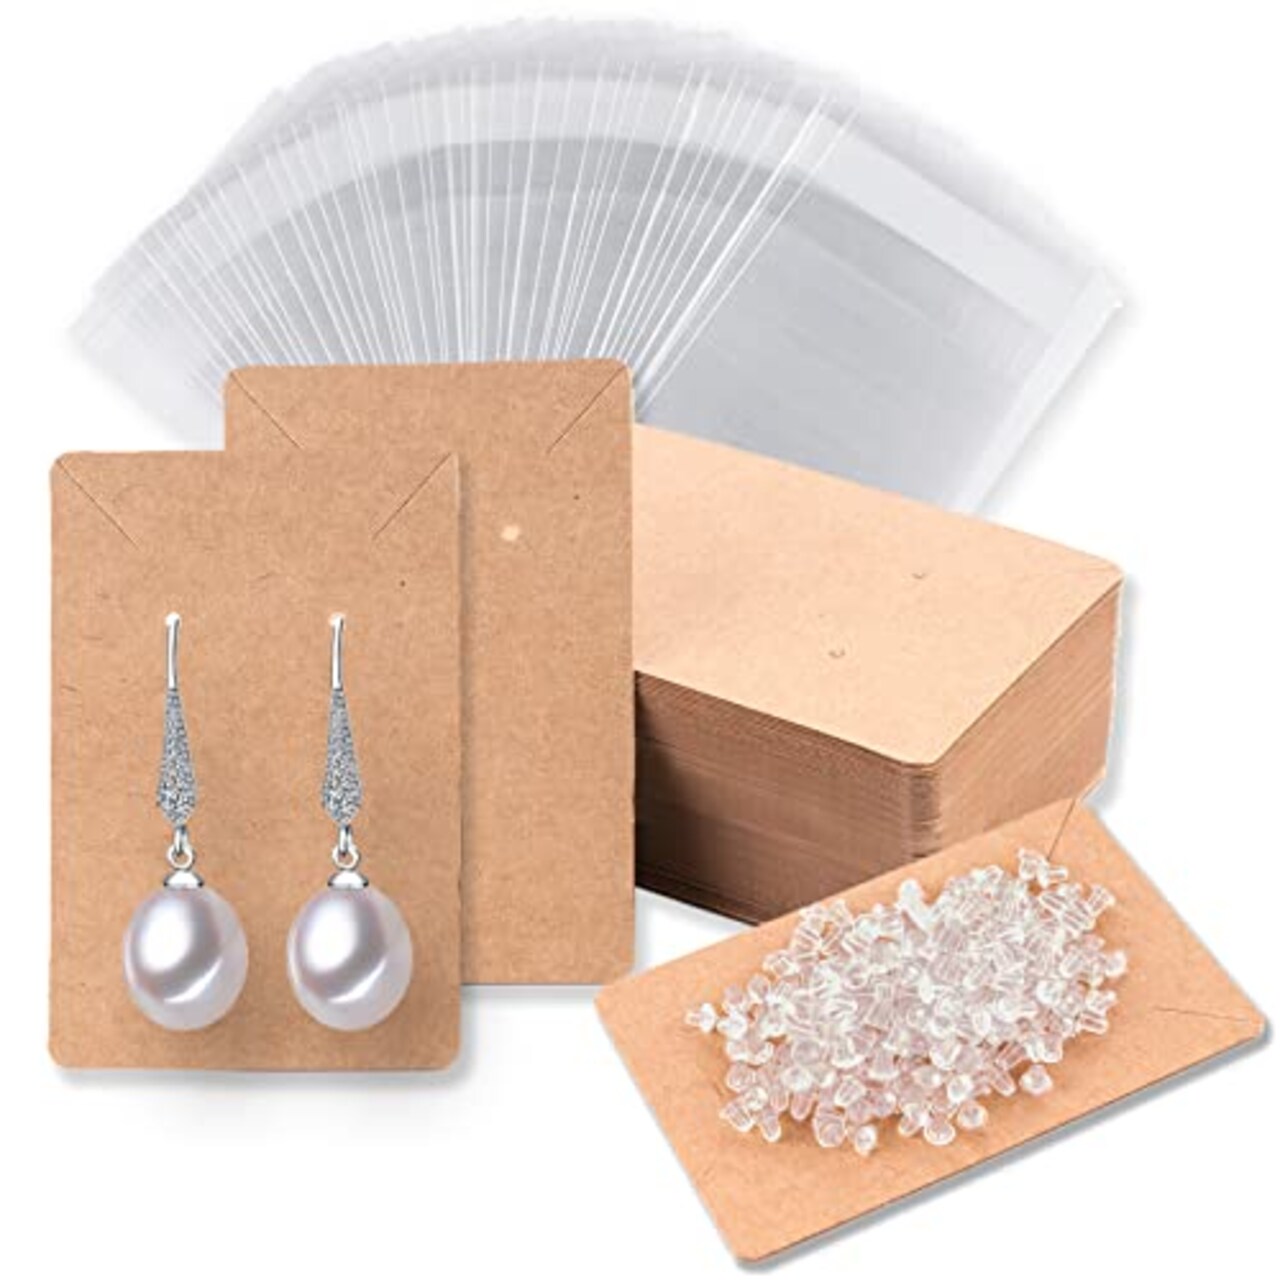 Earring Cards for Selling Including 120 Pcs Earring Holder Cards, 120  Earring Packaging and 240 Pcs Earring Backs, for Necklace/Jewelry Display,  Jewelry Packaging 3.5x2.4 Inches (Brown)